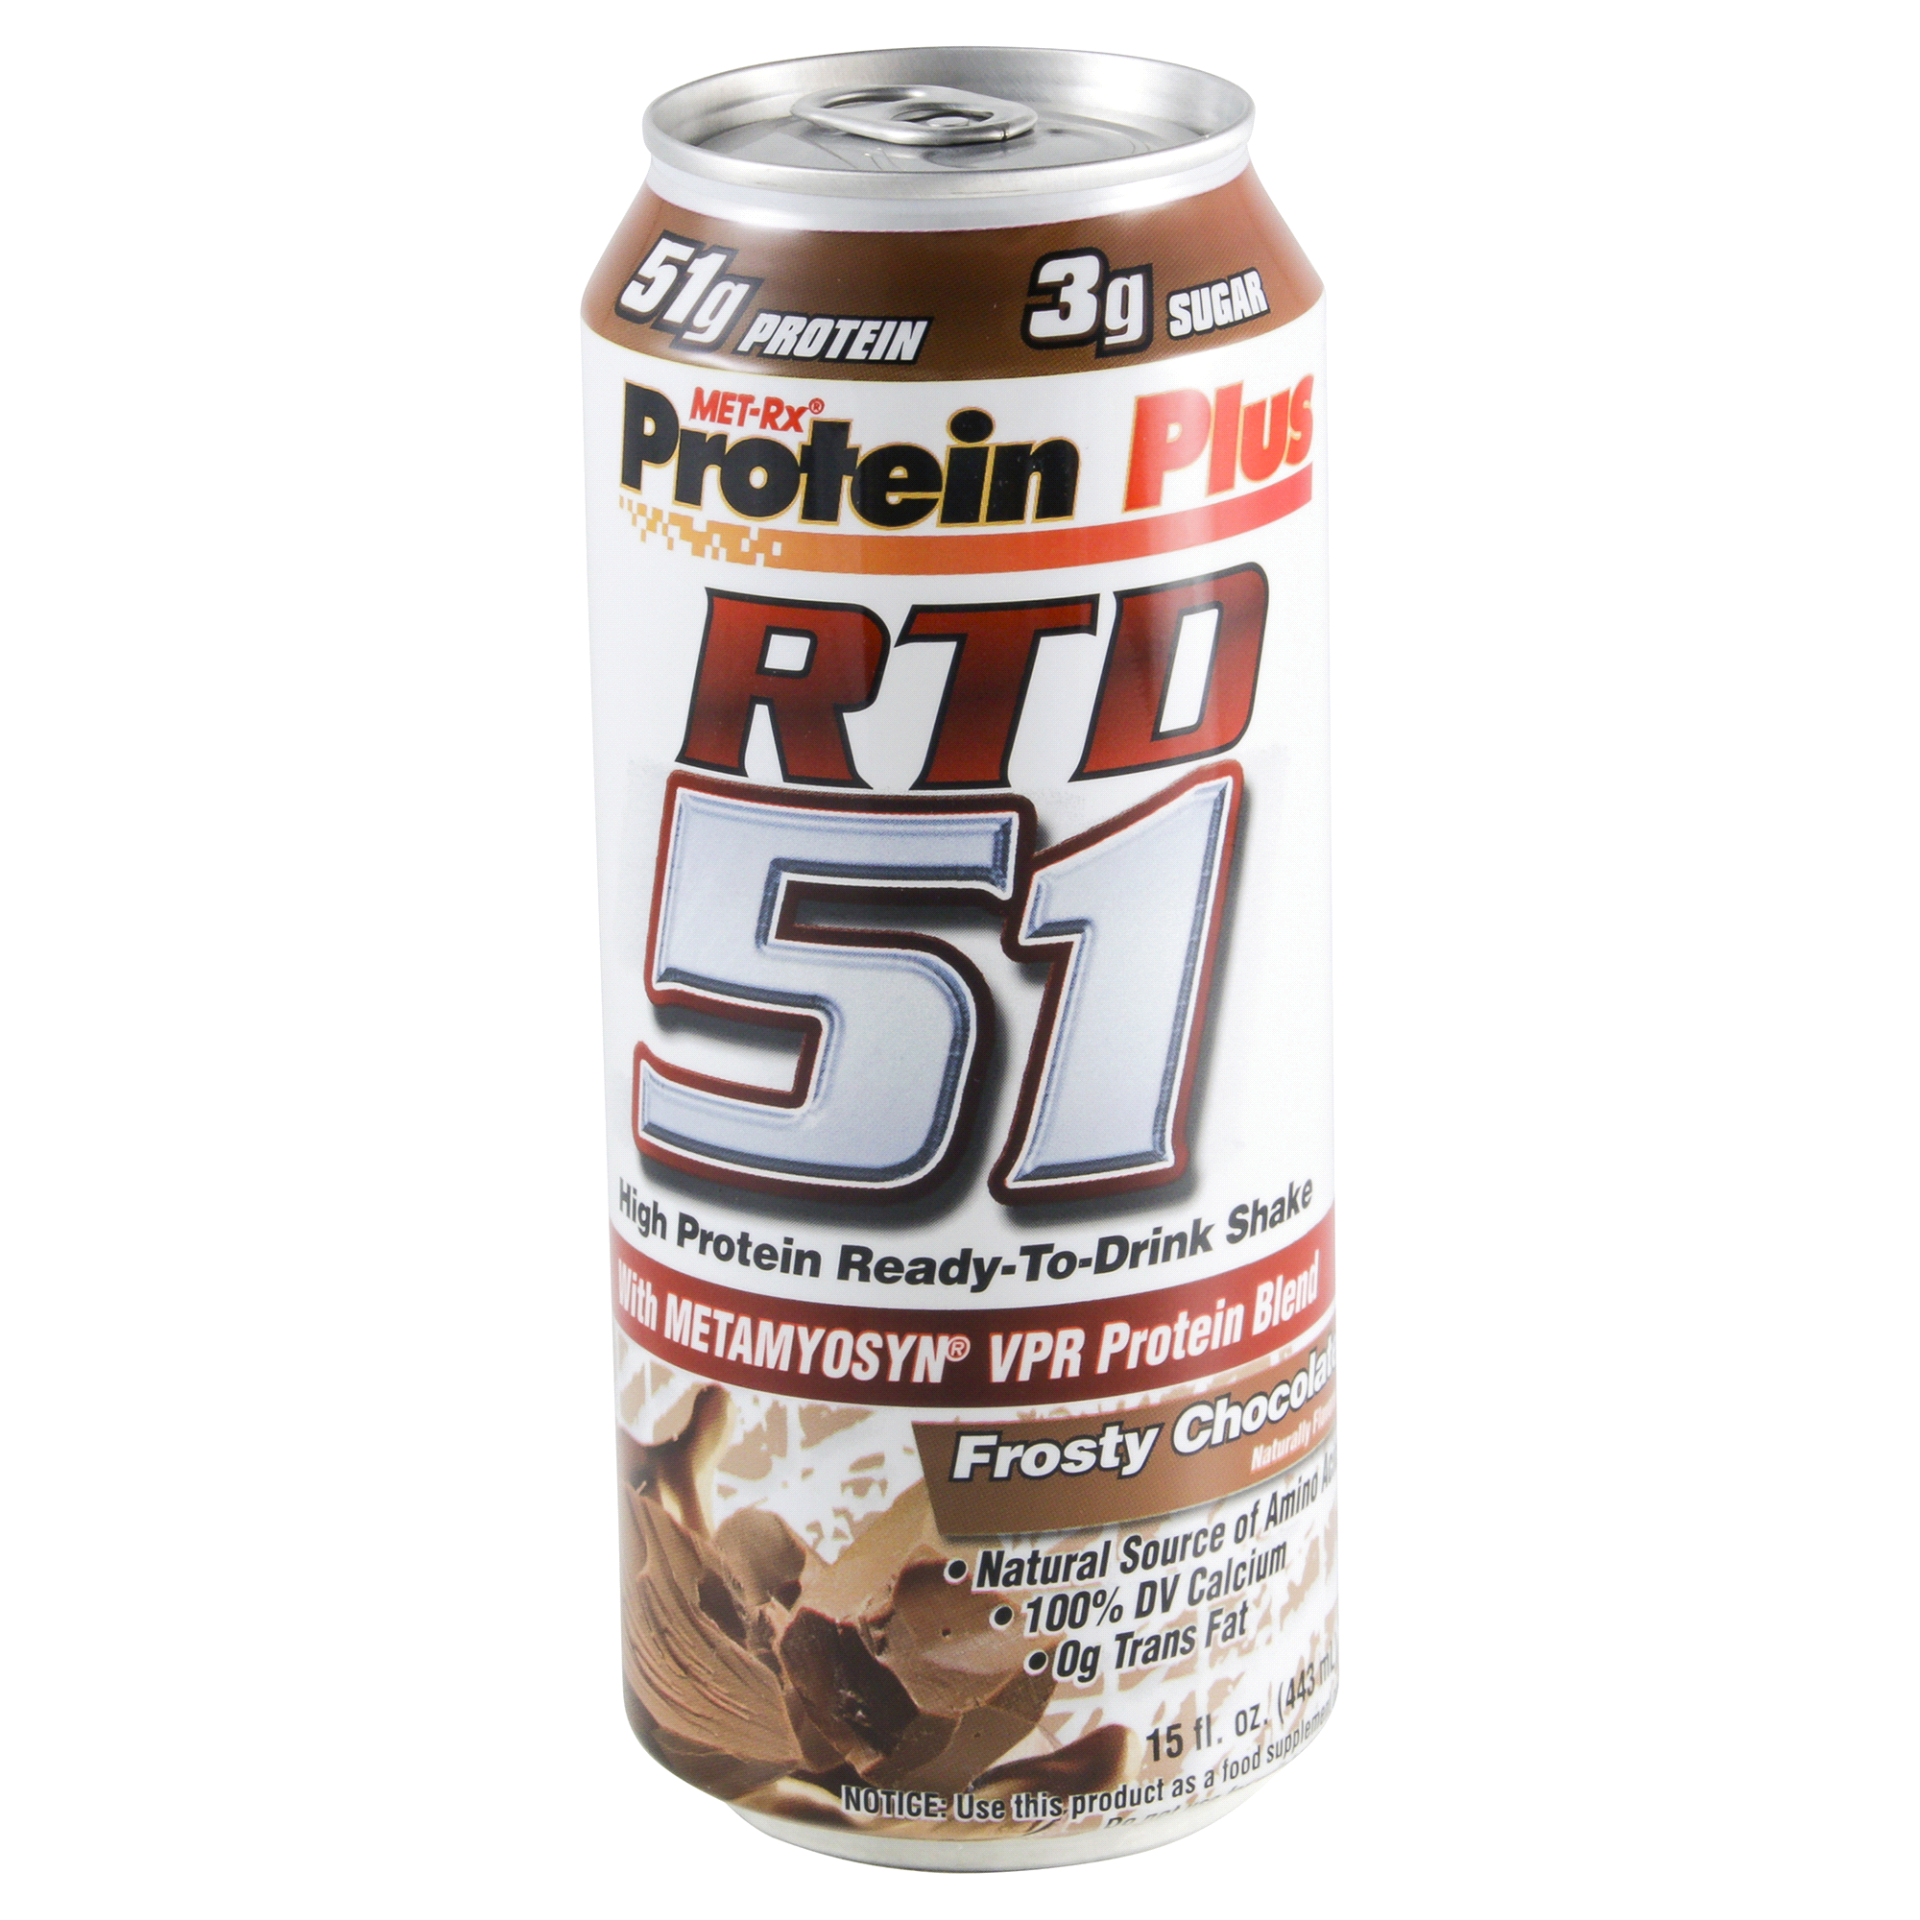 slide 1 of 4, MET-Rx Met Rx Ready To Drink 51G High Protein Shake - Frosty Chocolate, 15 fl oz